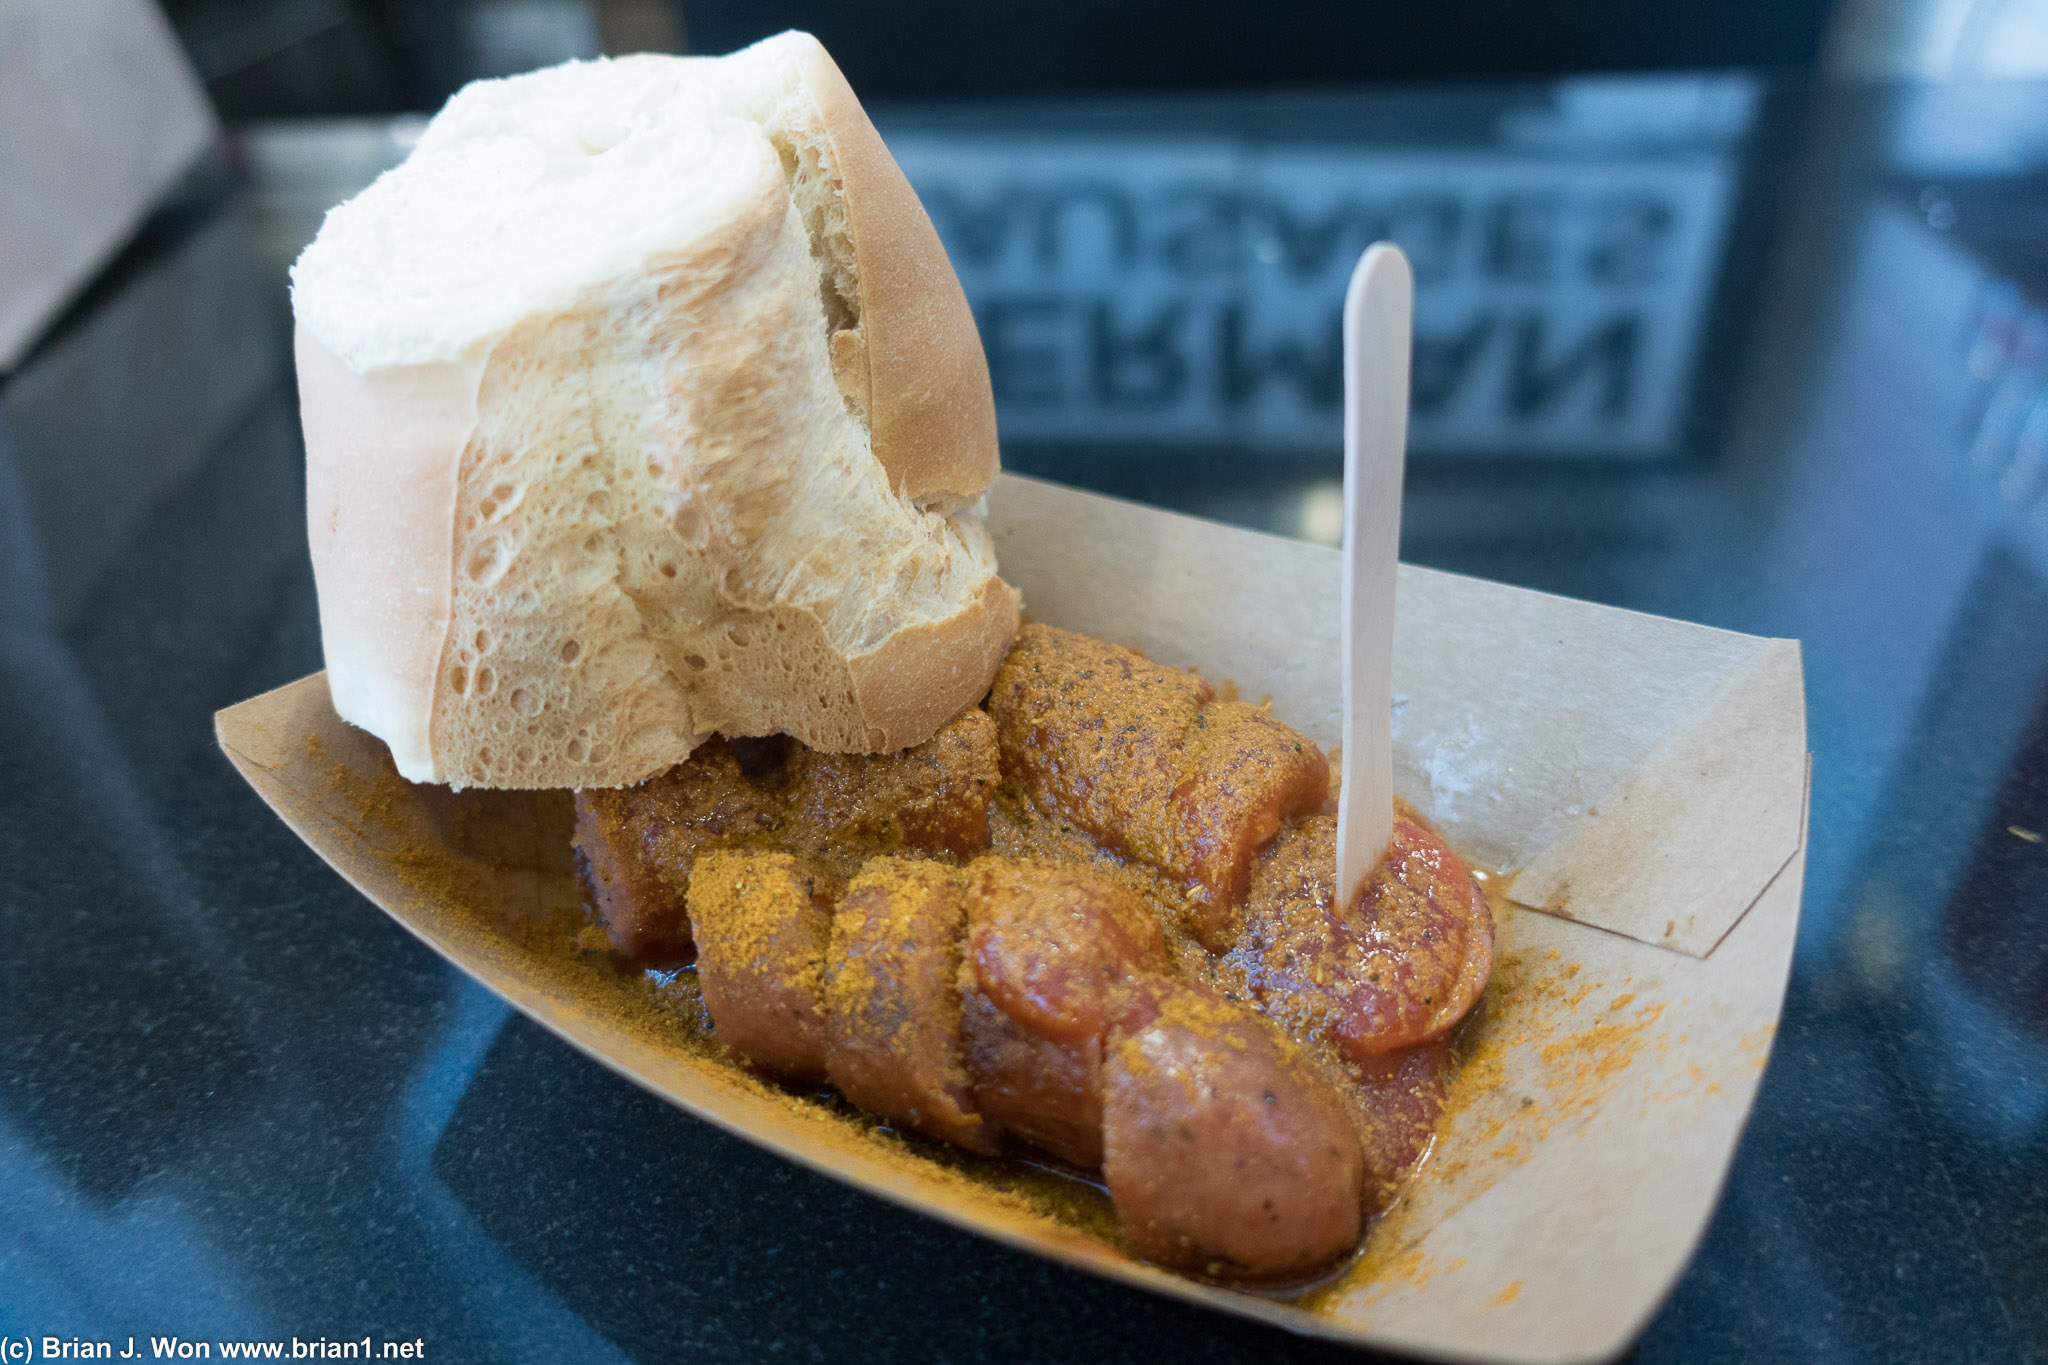 Currywurst with standard brat. Good but a small portion.